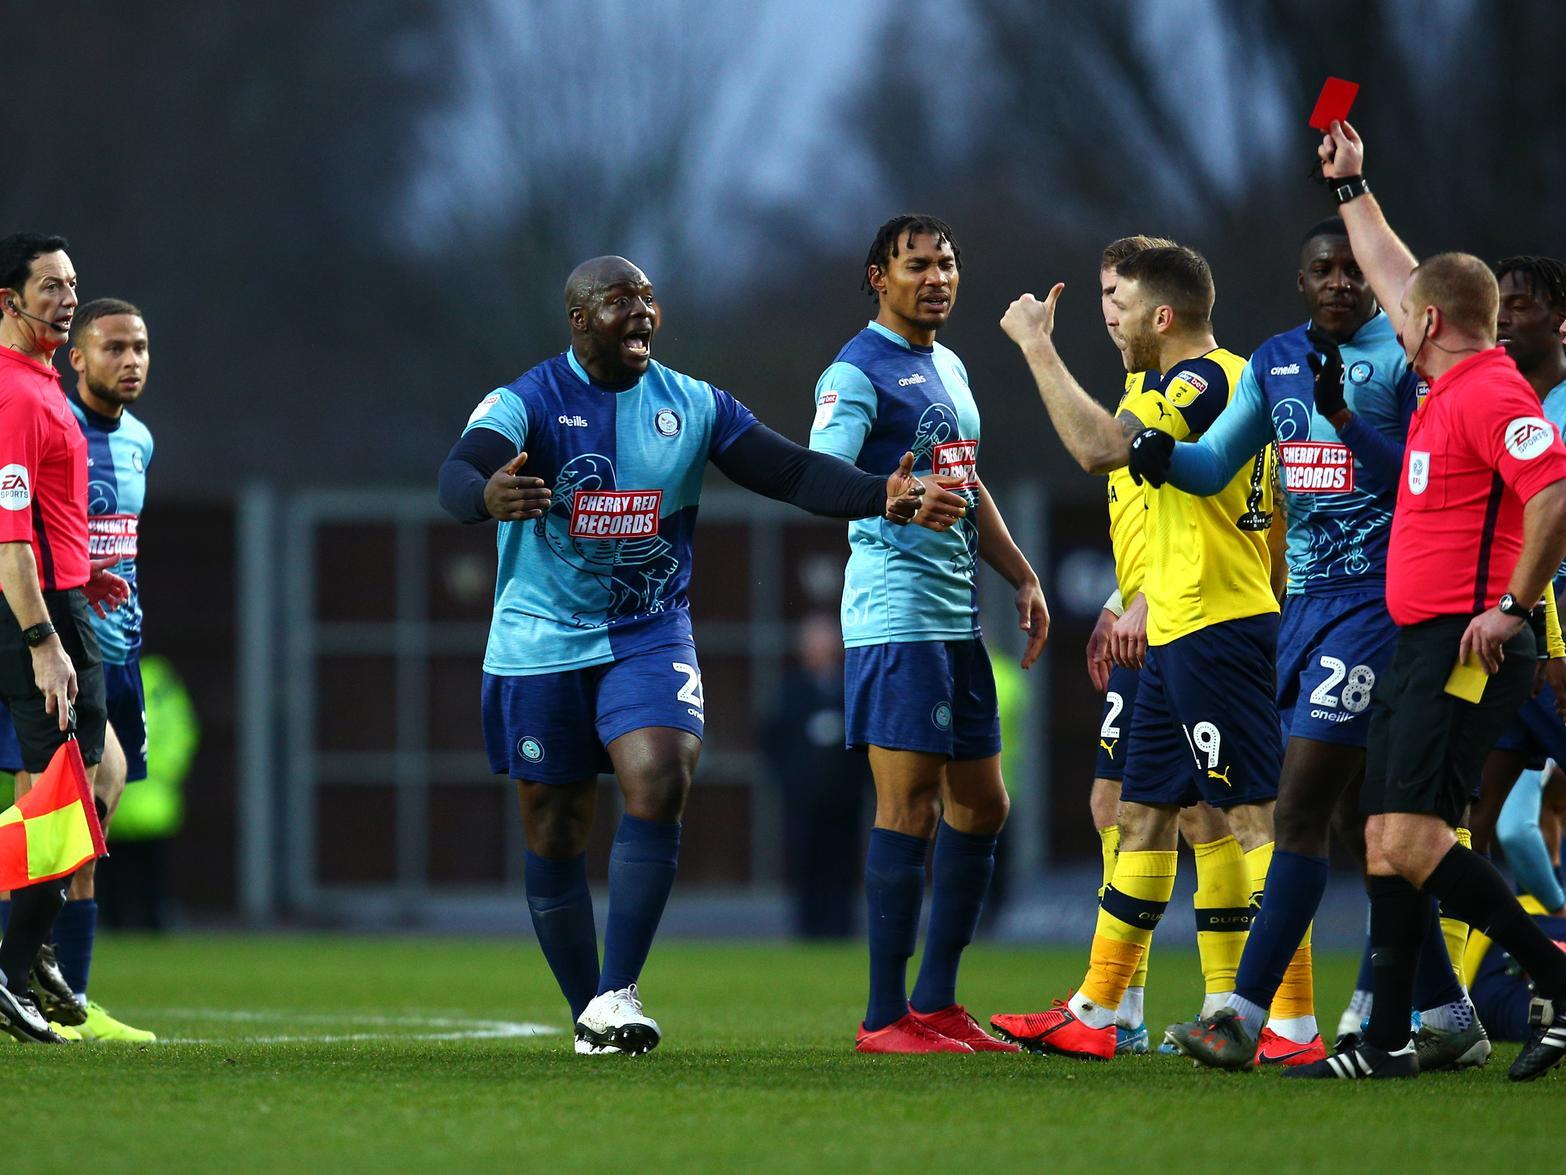 Sent off in the 26th minute as Wycome Wanderers suffered a shock 1-0 loss to Oxford United at the Kassam Stadium.